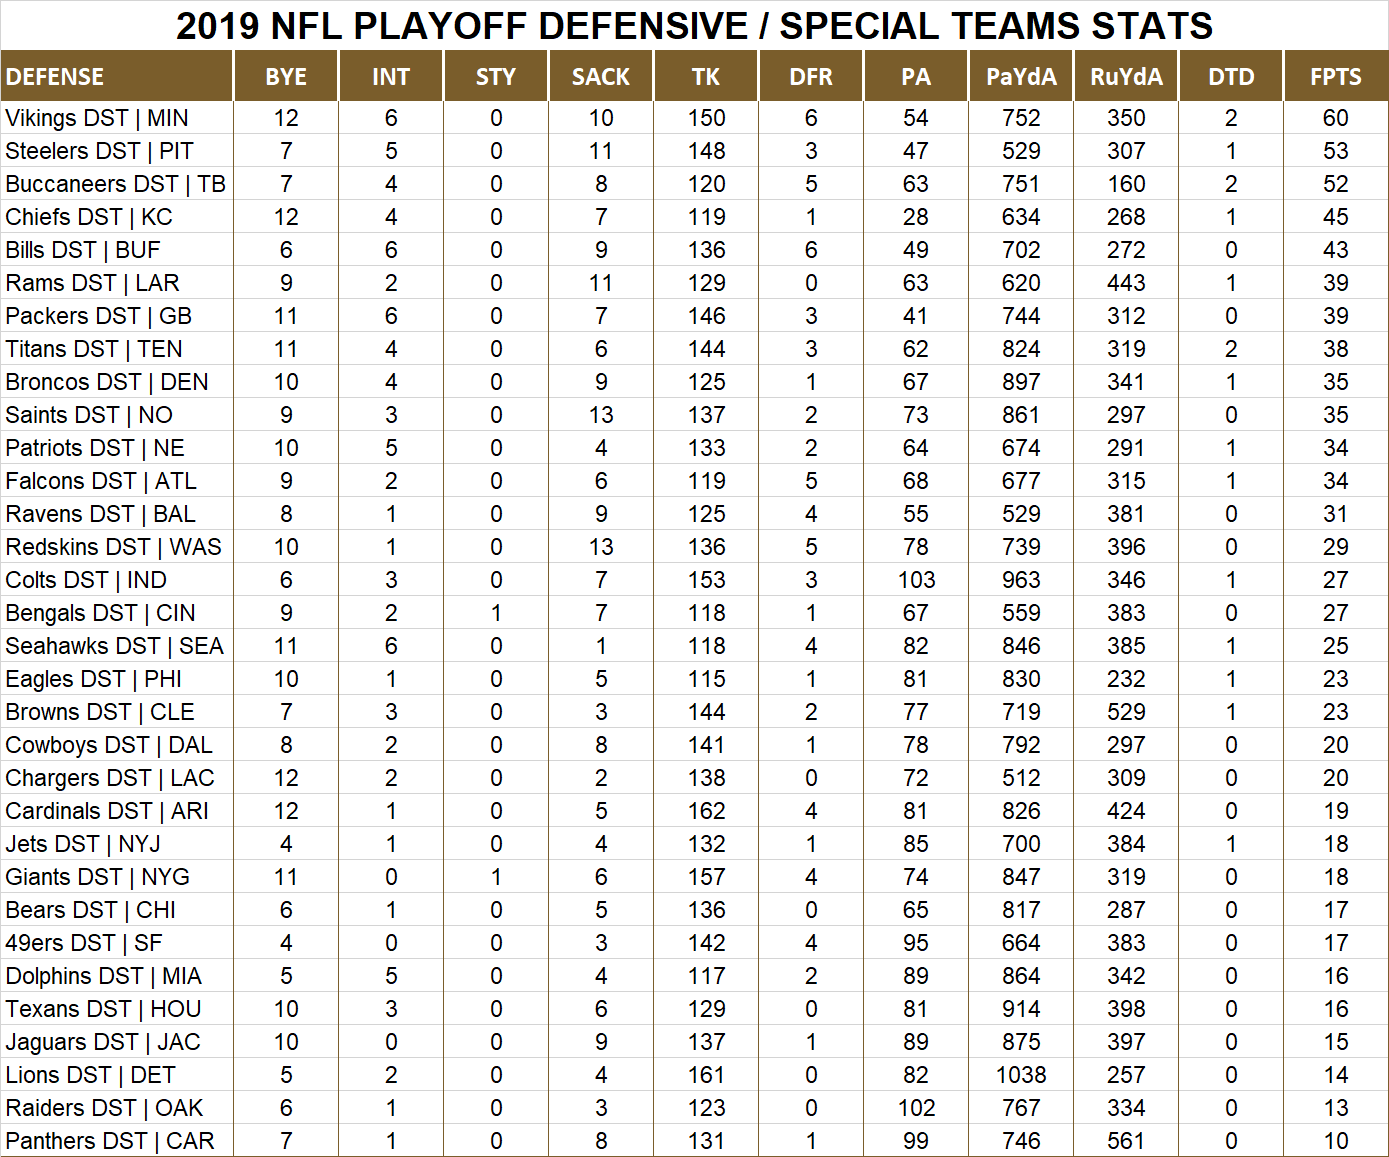 2019 National Football League Pool Playoff Player Defensive Stats